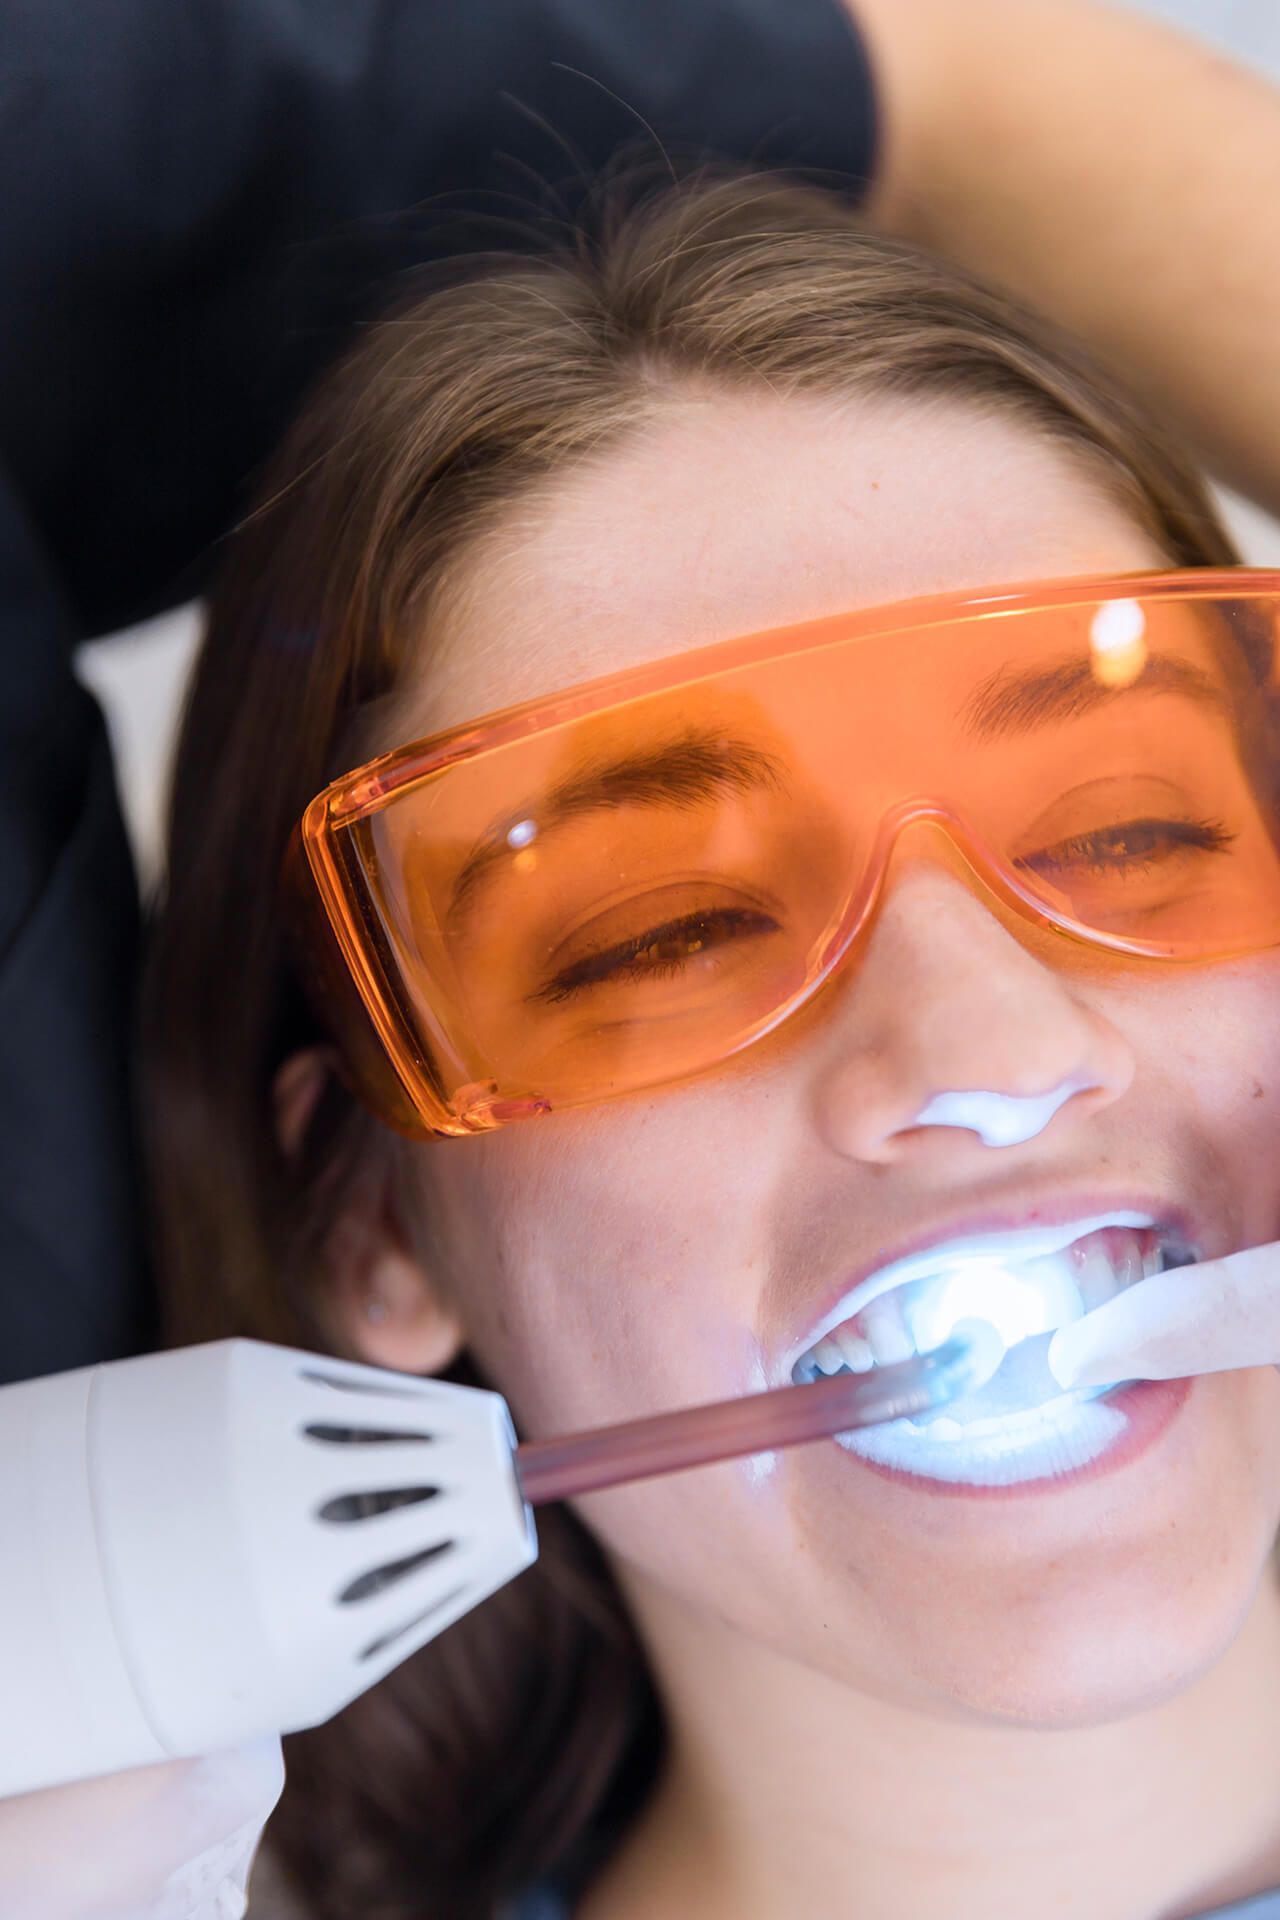 female patient's face going through laser teeth whitening treatment